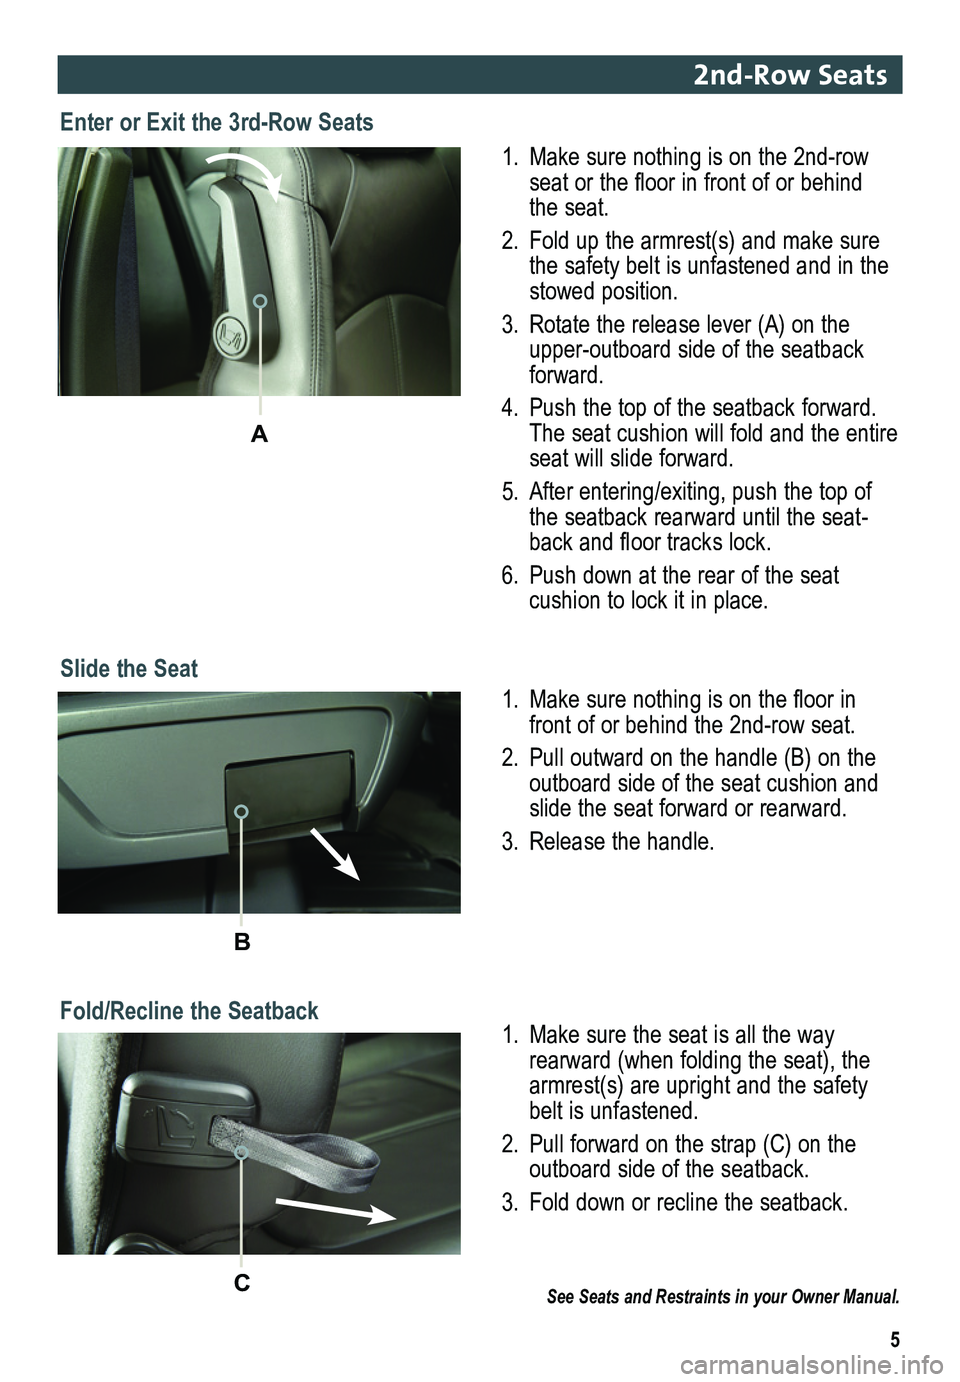 GMC ACADIA 2014  Get To Know Guide 5
2nd-Row Seats 
Slide the Seat
1. Make sure nothing is on the 2nd-row seat or the floor in front of or behind the seat.
2. Fold up the armrest(s) and make sure the safety belt is unfastened and in th